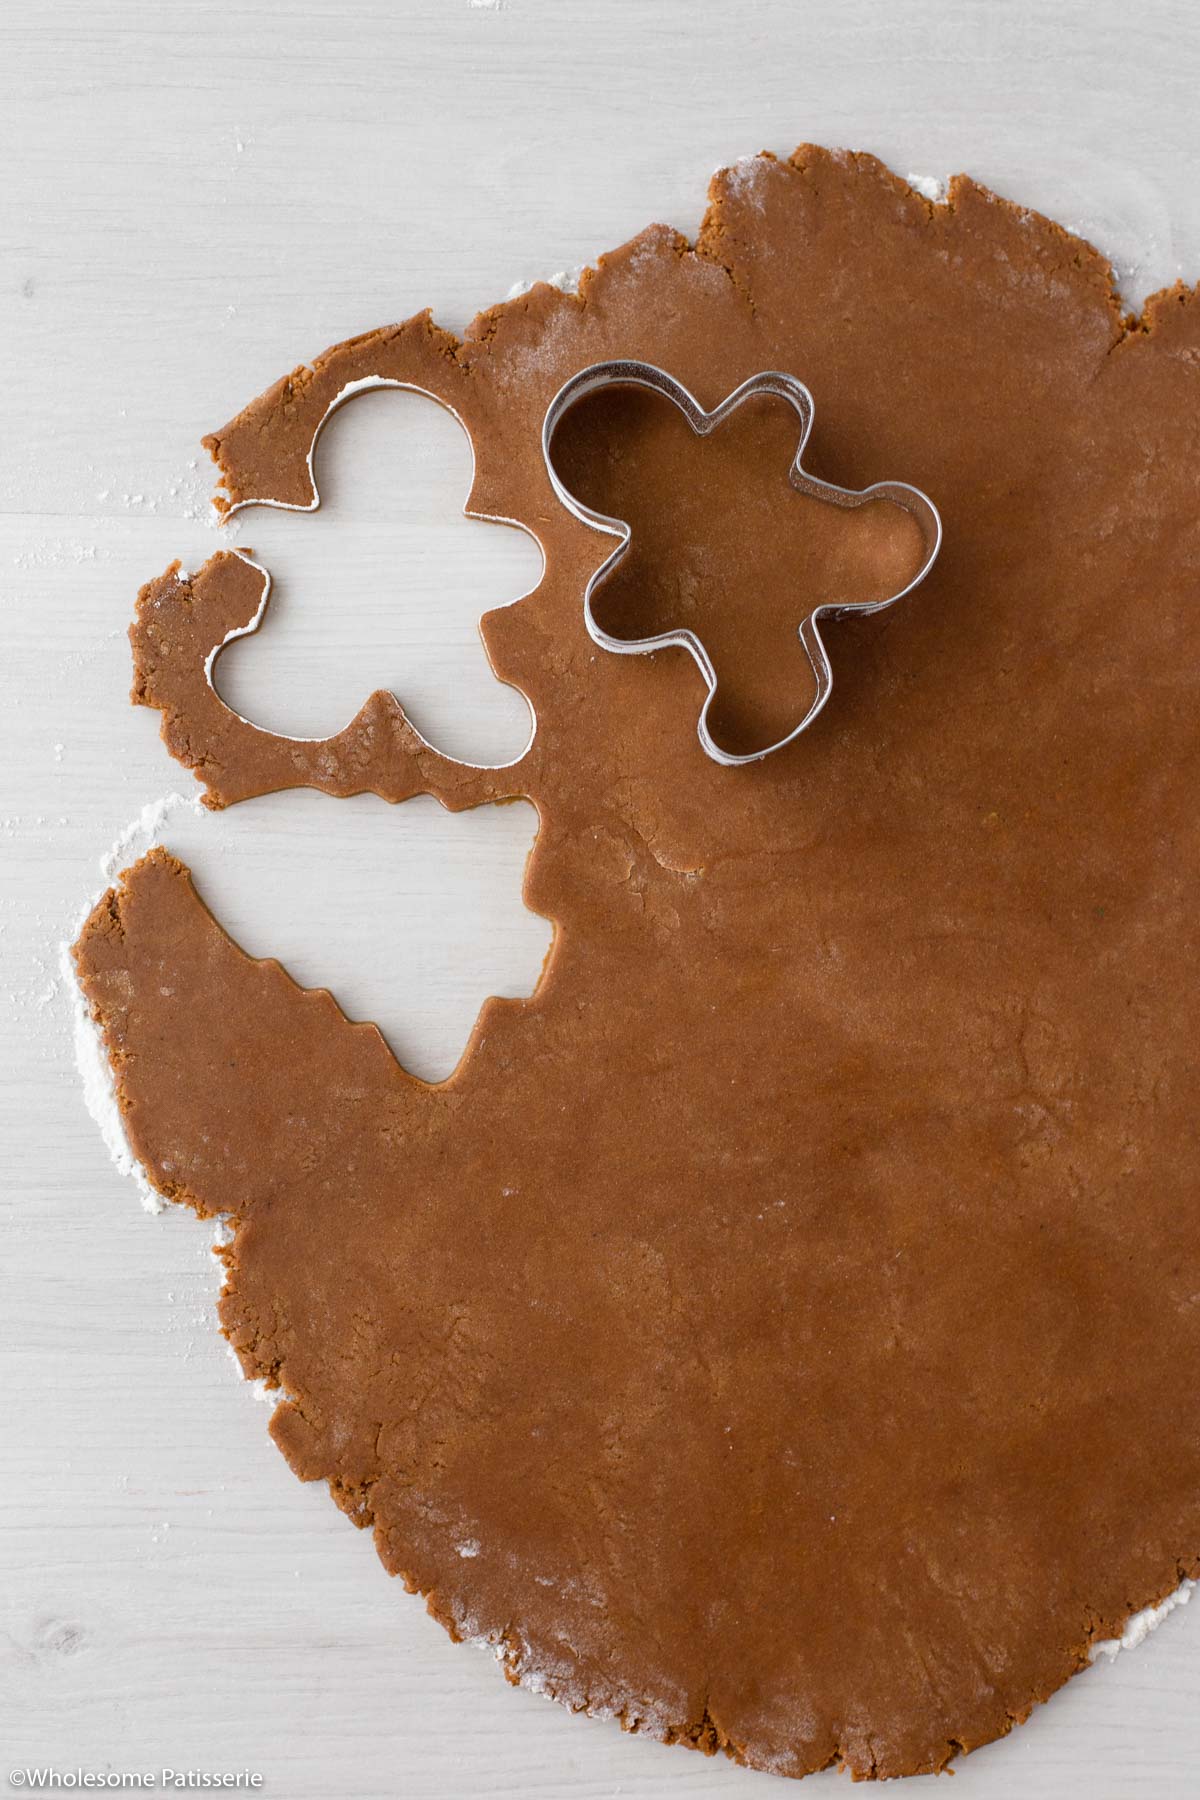 Cutting out the cookie shapes